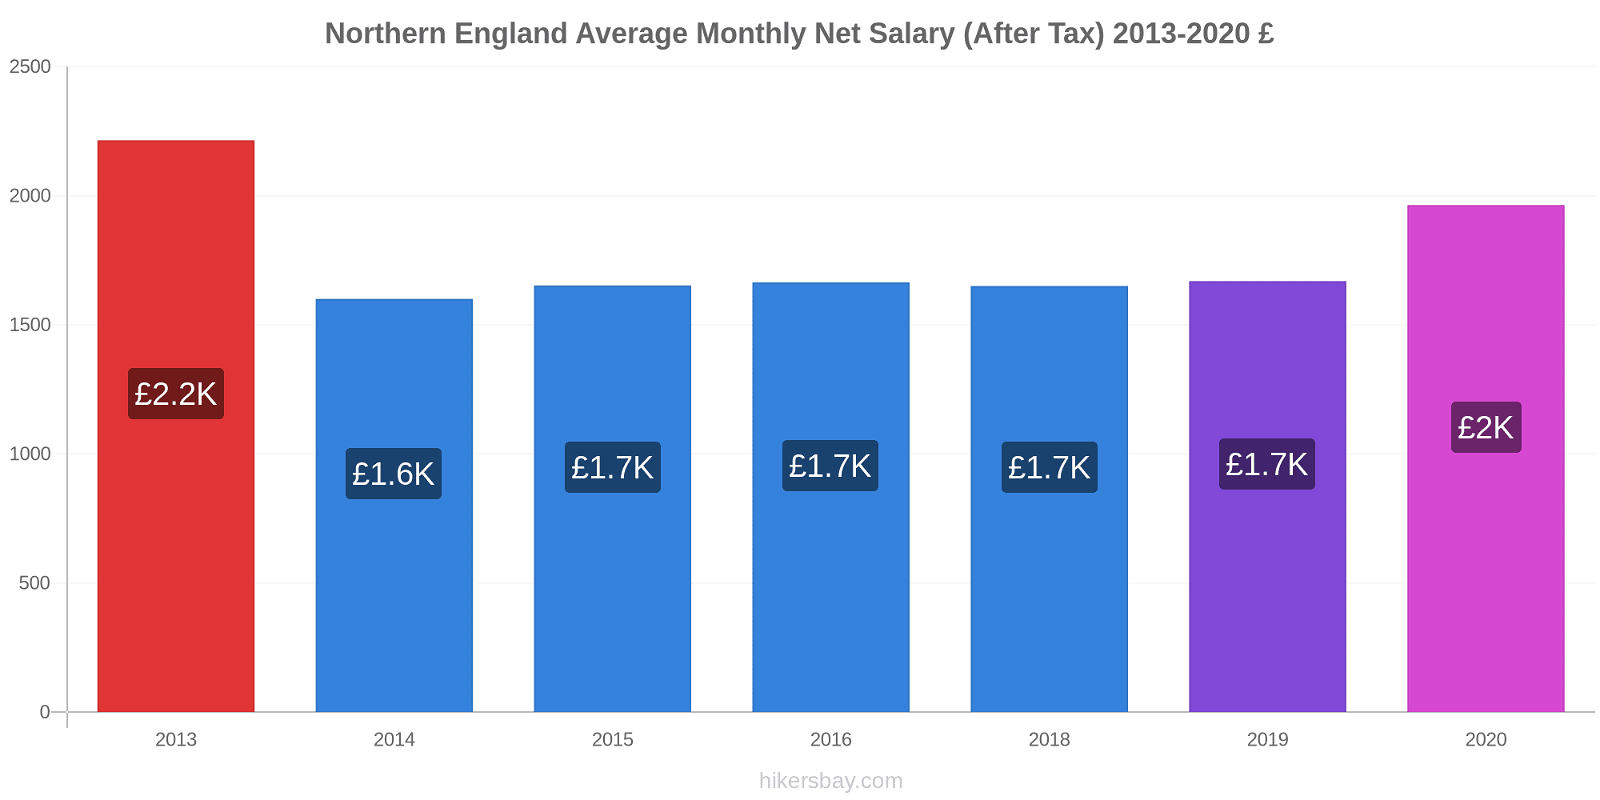 Northern England price changes Average Monthly Net Salary (After Tax) hikersbay.com